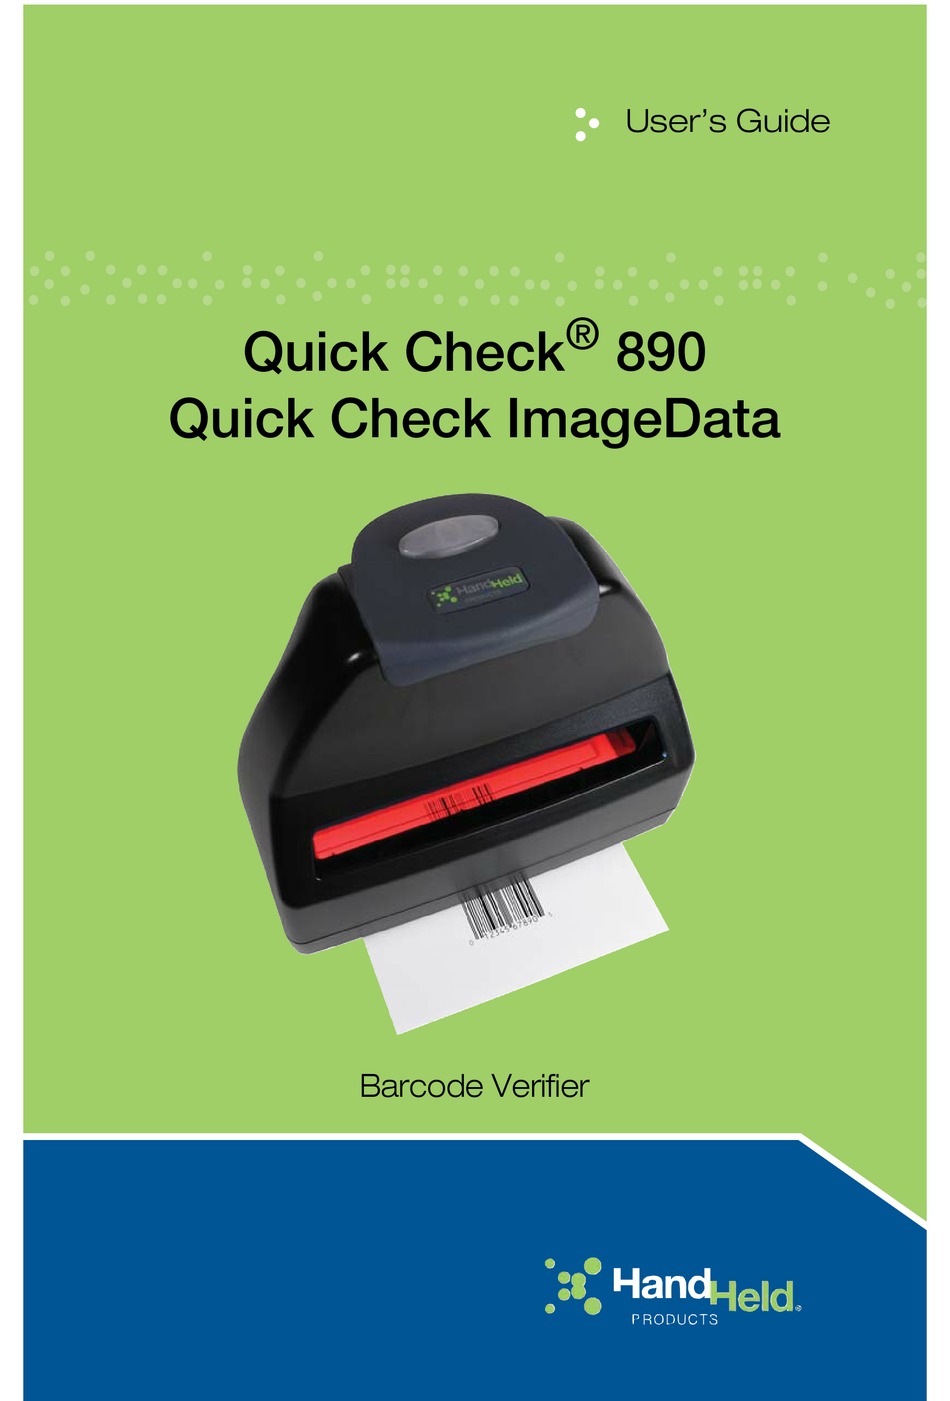 Hand Held Products Quick Check Imagedata Barcode Verifier Quick Check